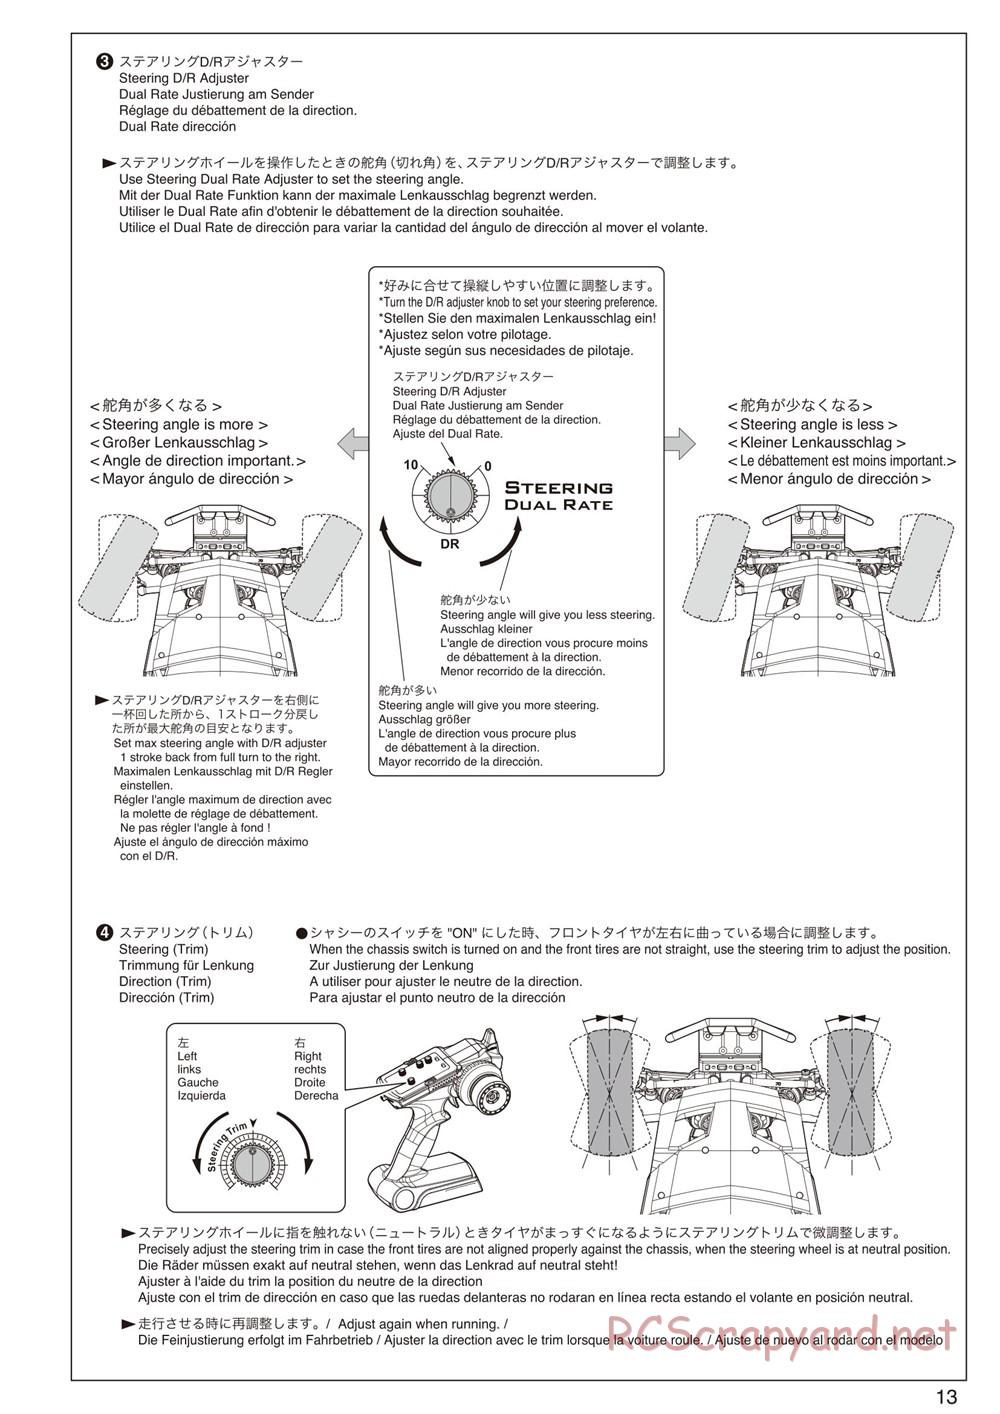 Kyosho - Axxe 2WD Desert Buggy - Manual - Page 13